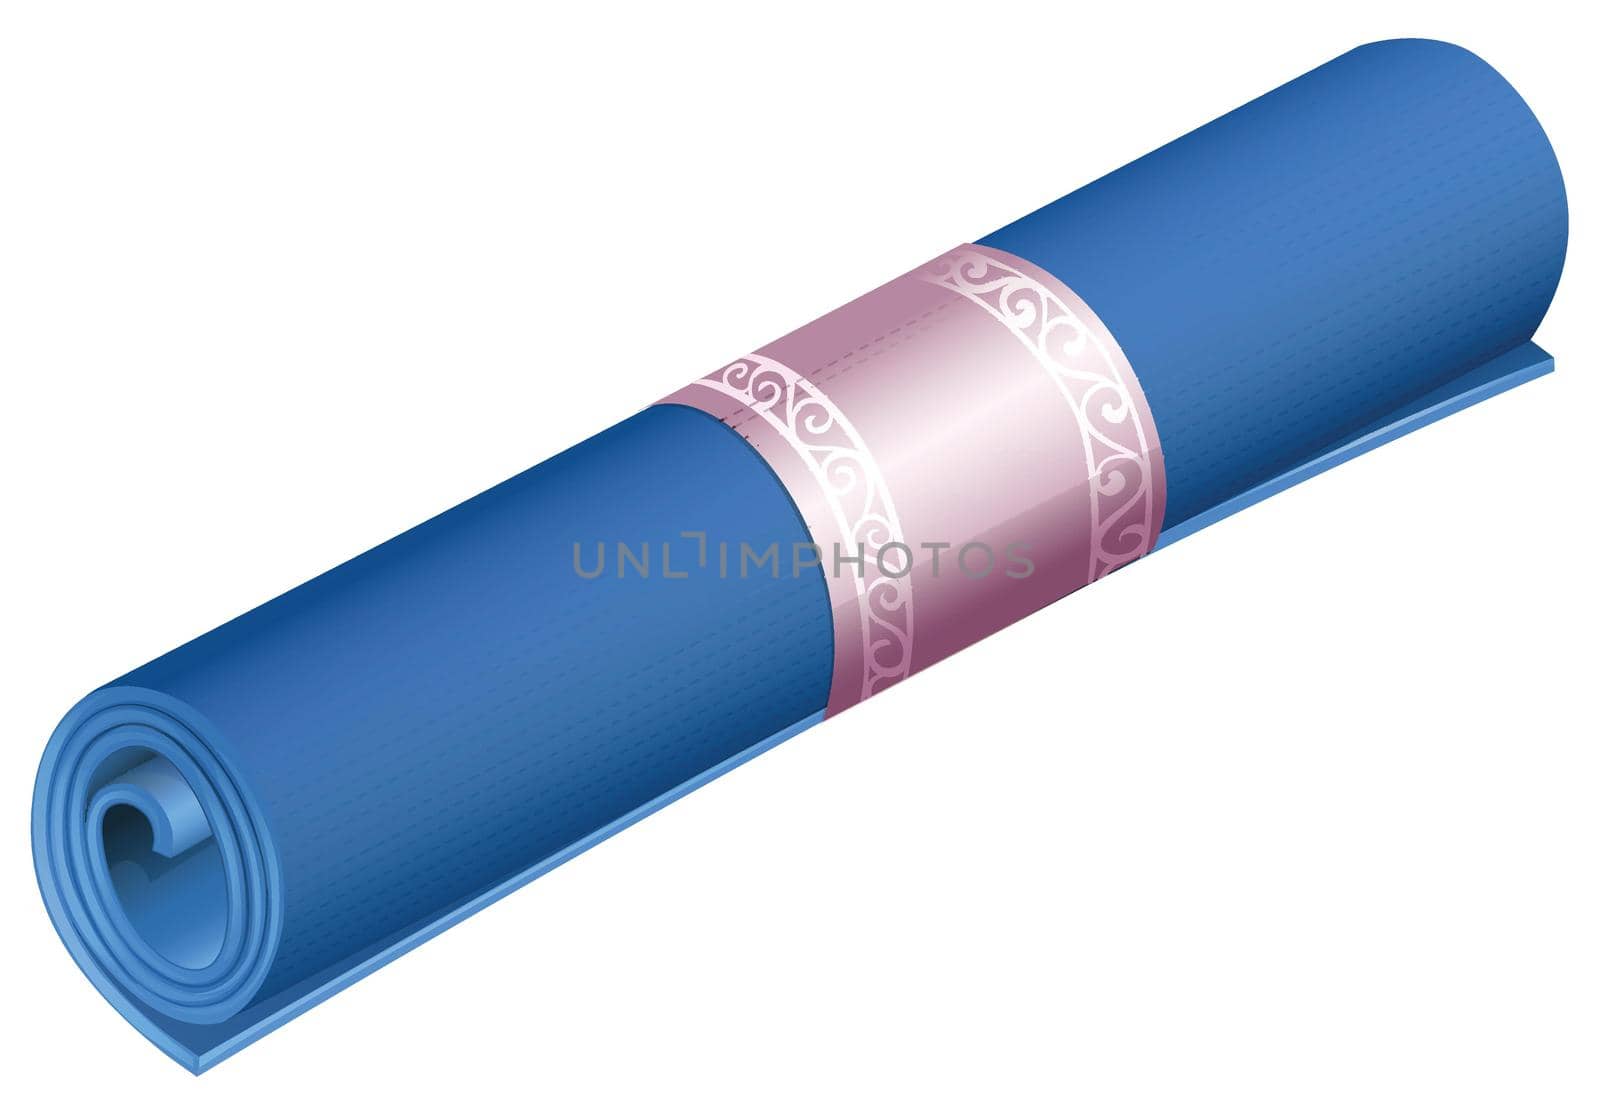 Rolled yoga mat on white by iimages